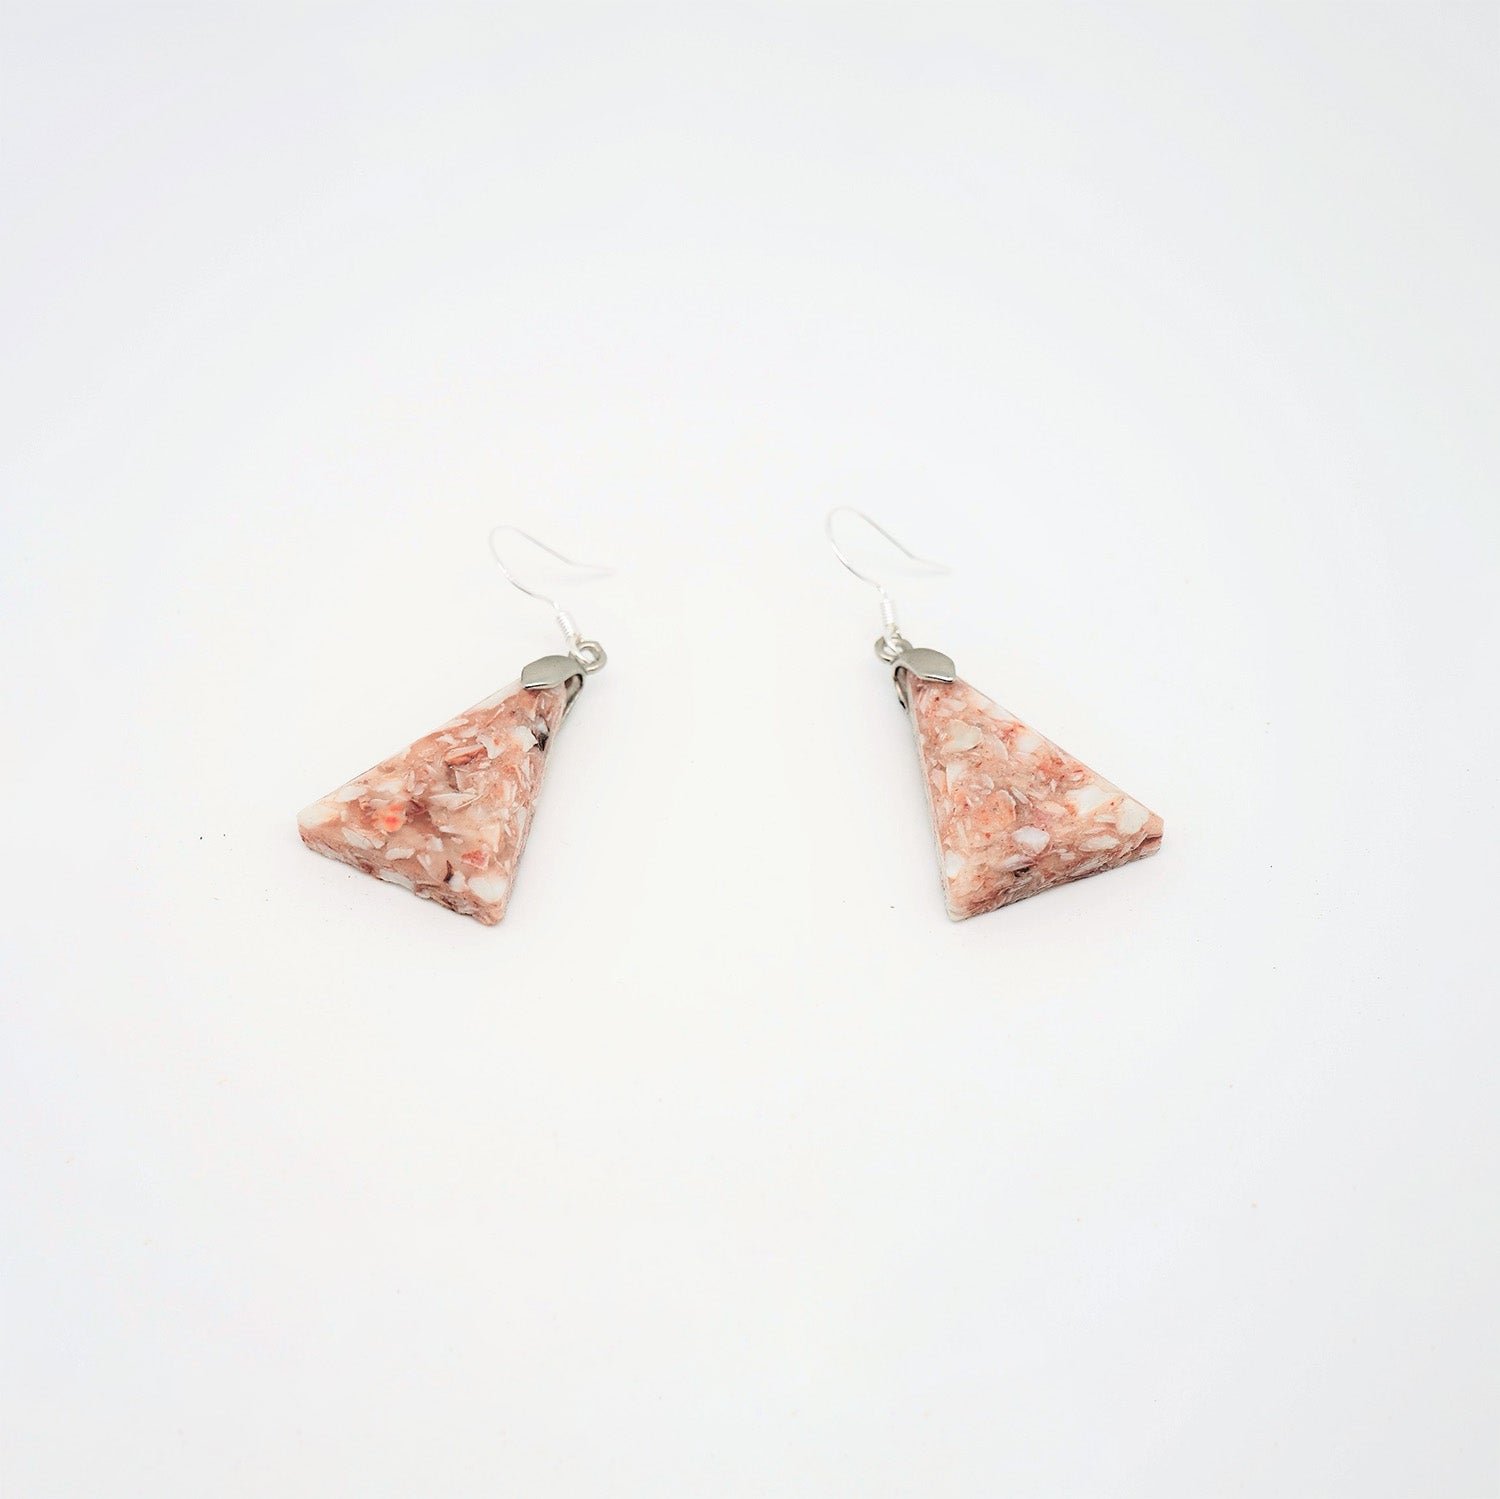 Triangle earrings made from recycled scallop shells